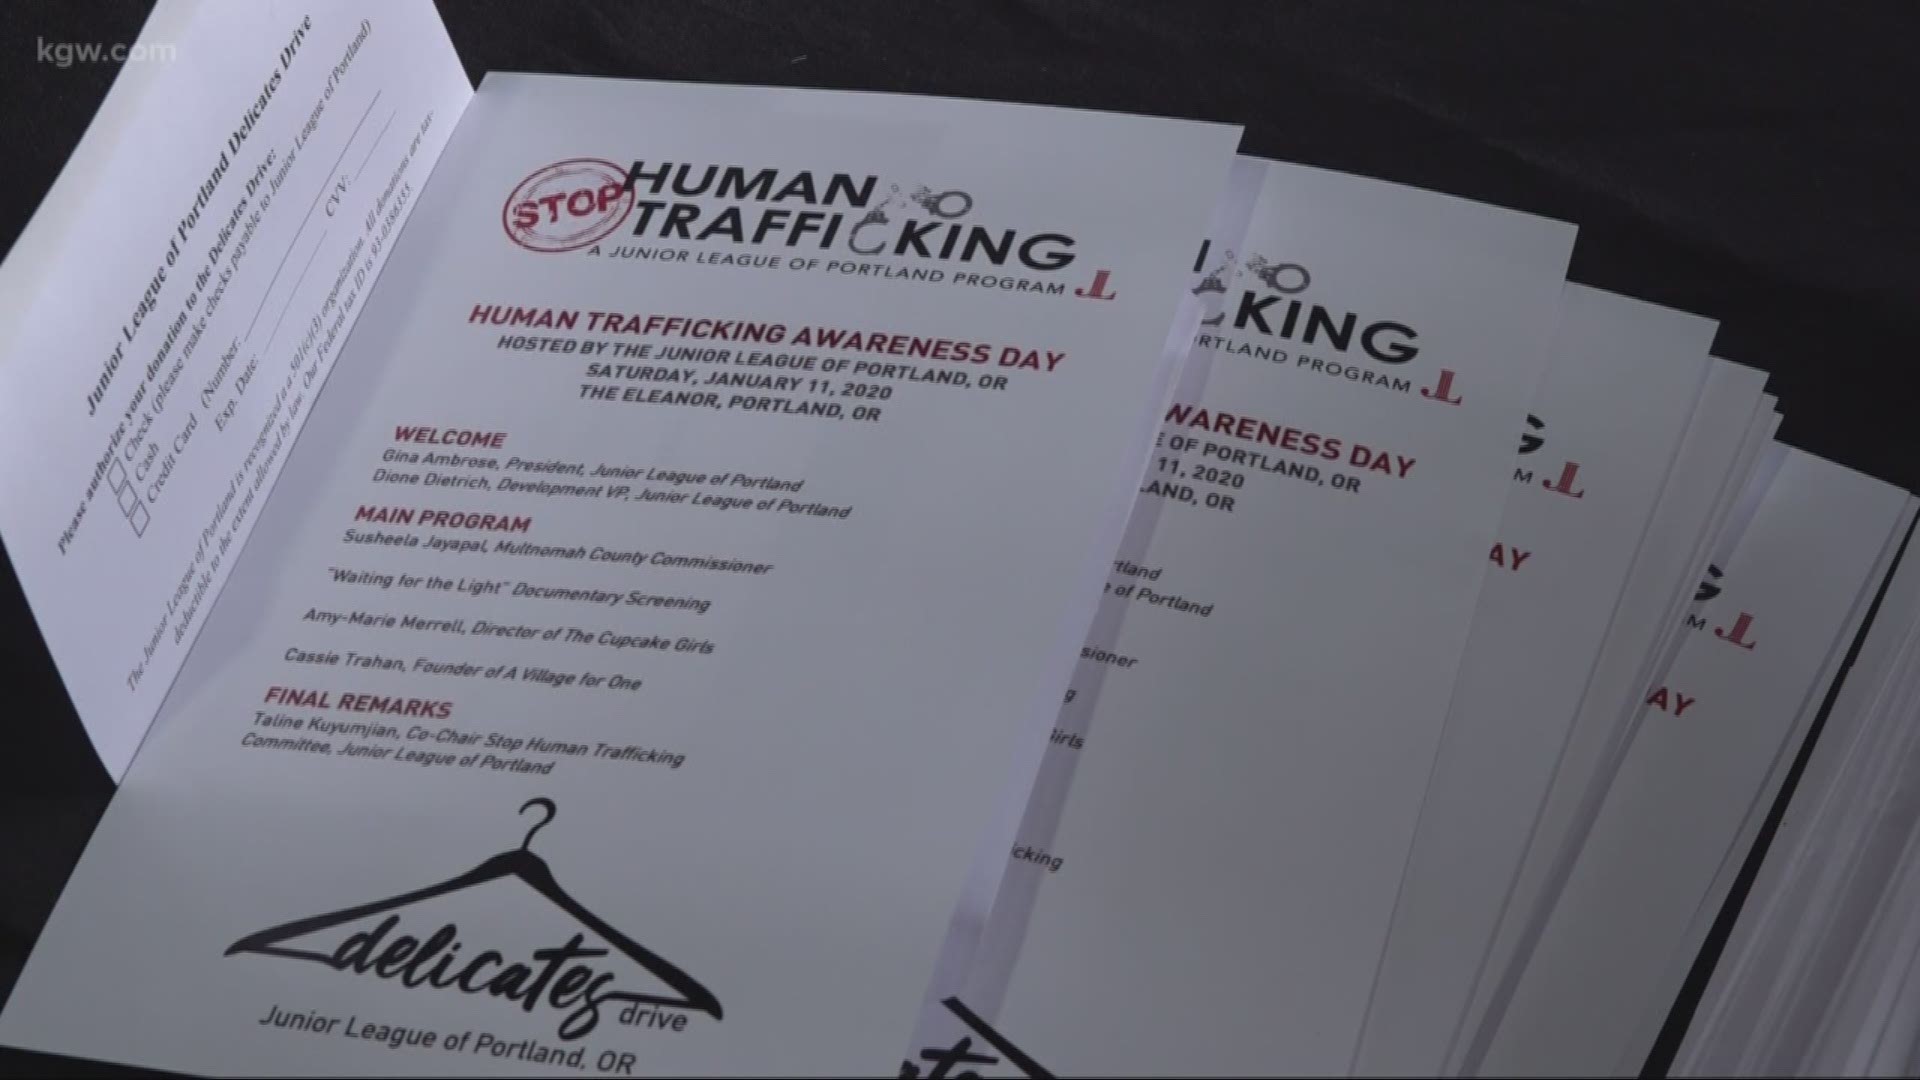 The Junior League of Portland brought advocates together to raise awareness and find solutions for the area's juvenile sex trafficking problem